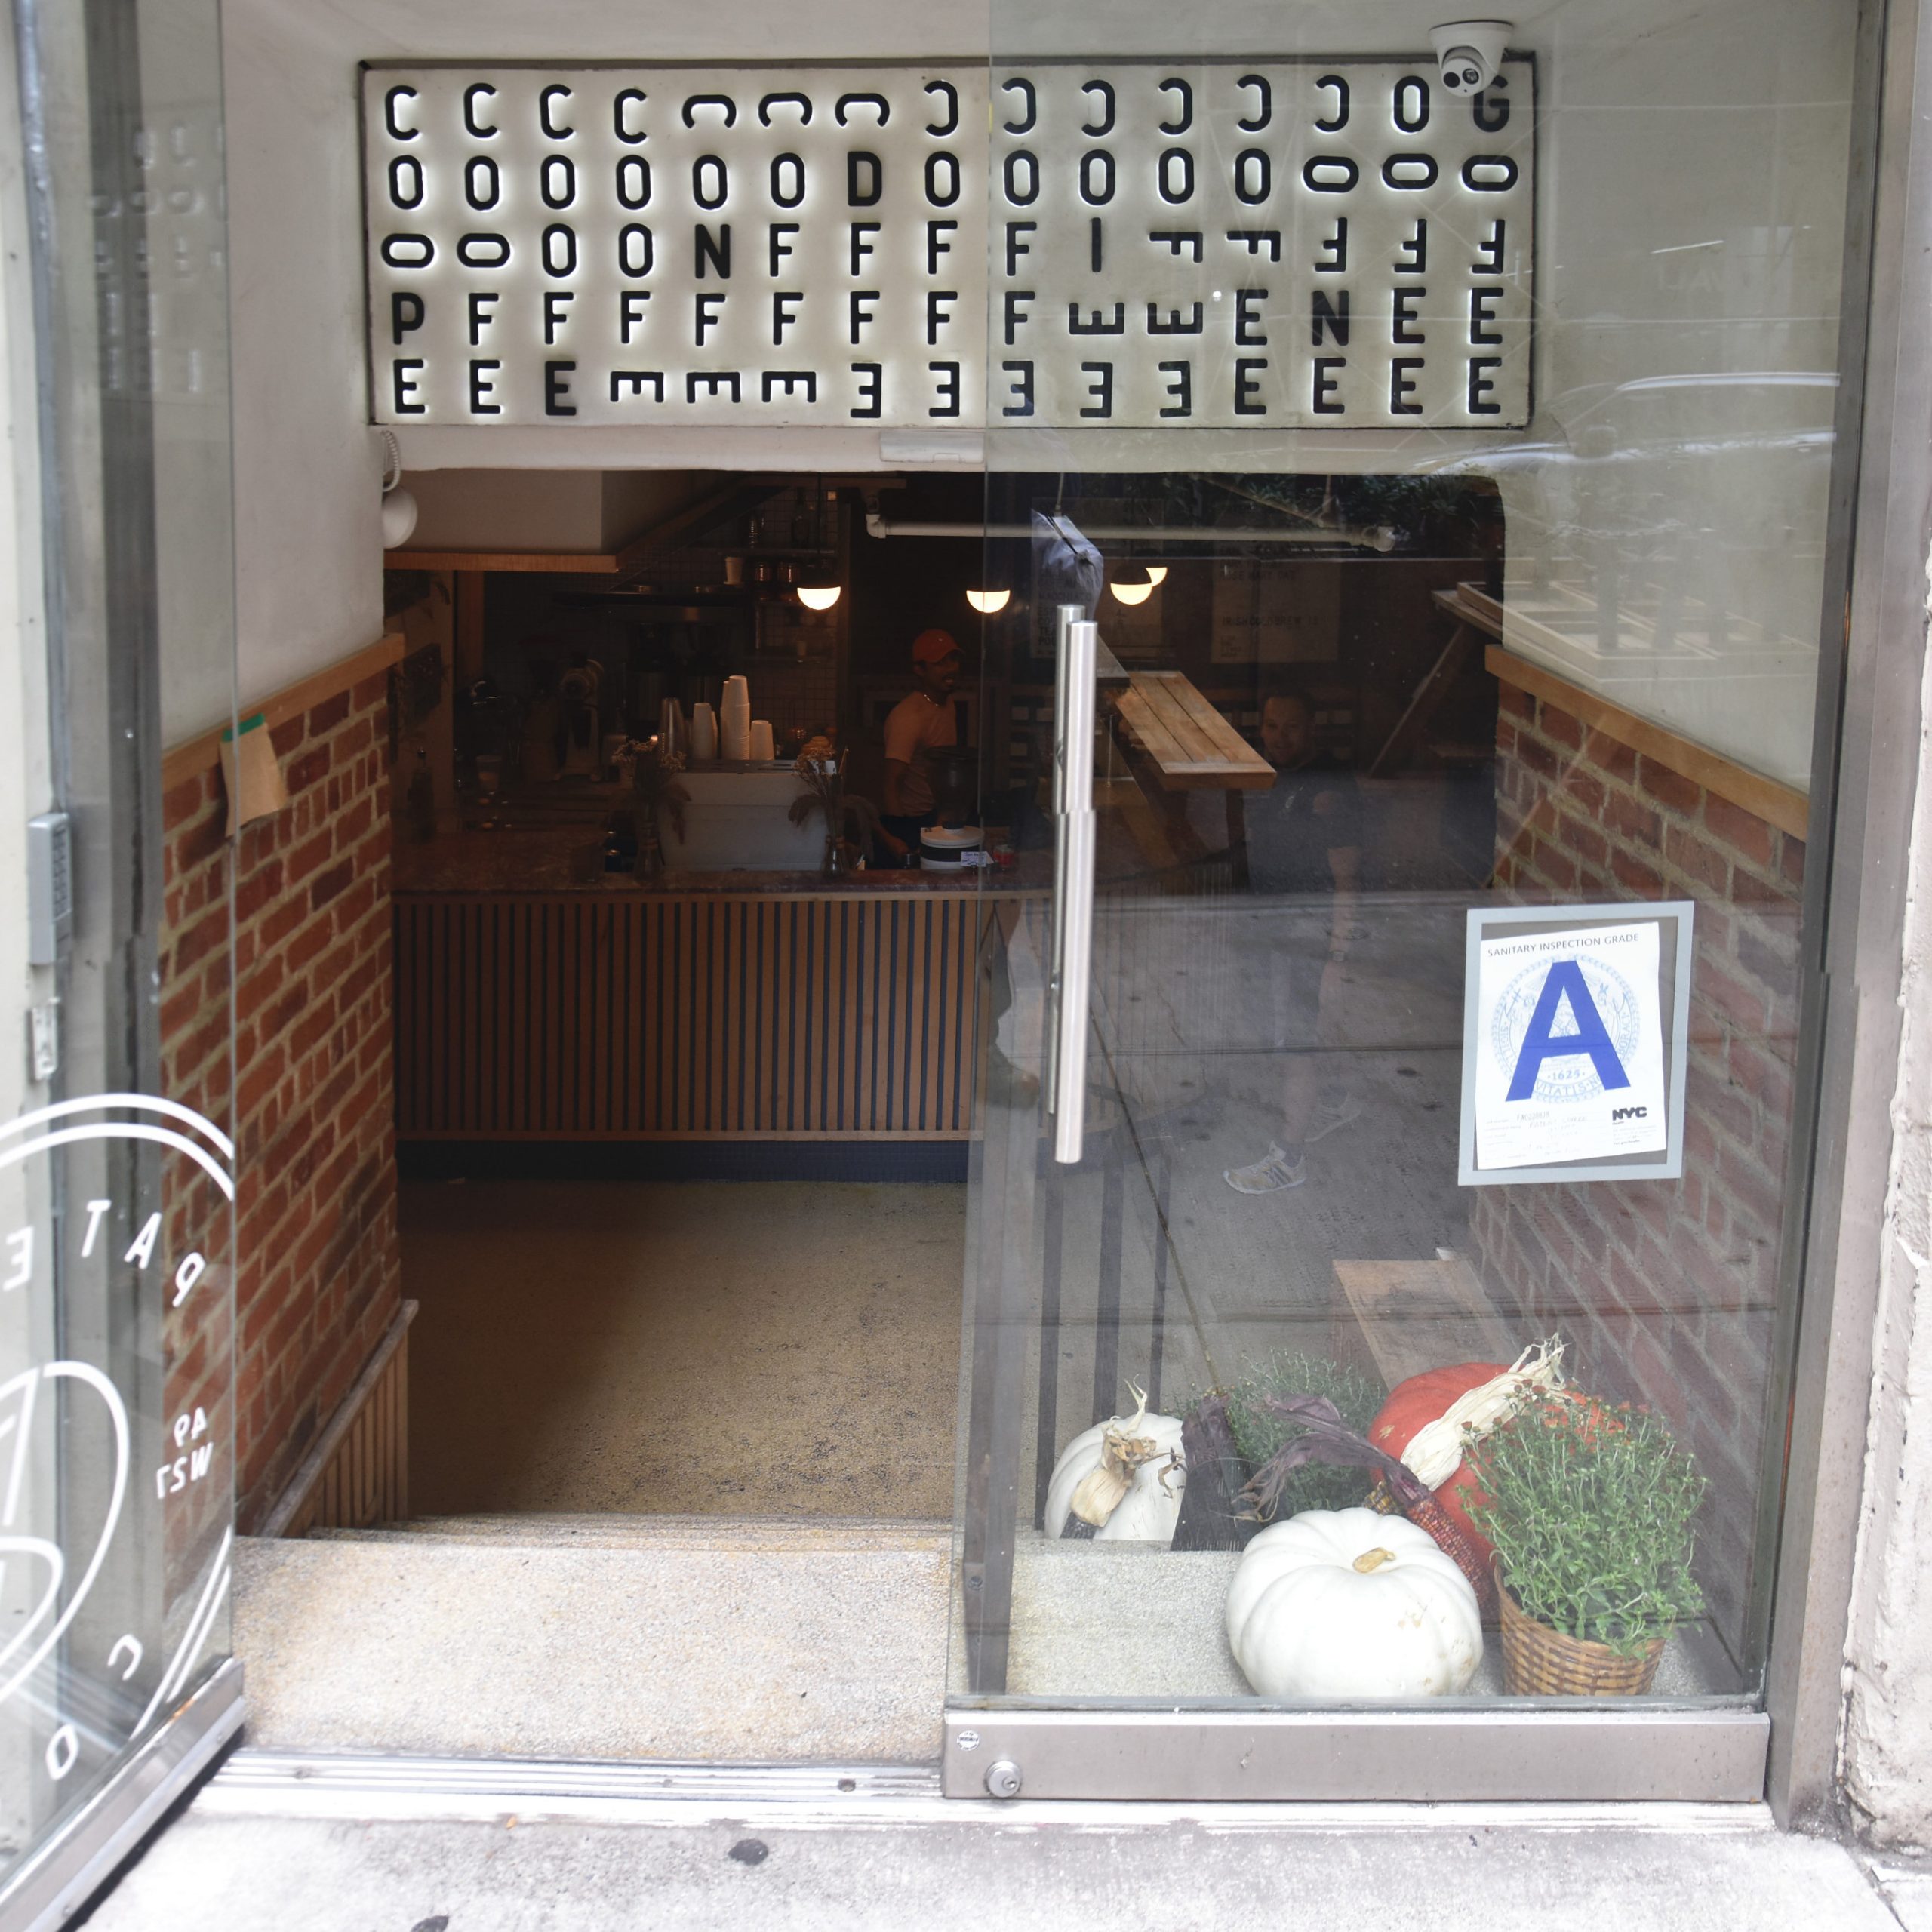 The glass double doors at the entrance to Patent Coffee in the Radio Wave Building in New York City. The left one is open, beoynd which are broad stone steps descending to basement, with the counter of Patent Coffee visible at the back.